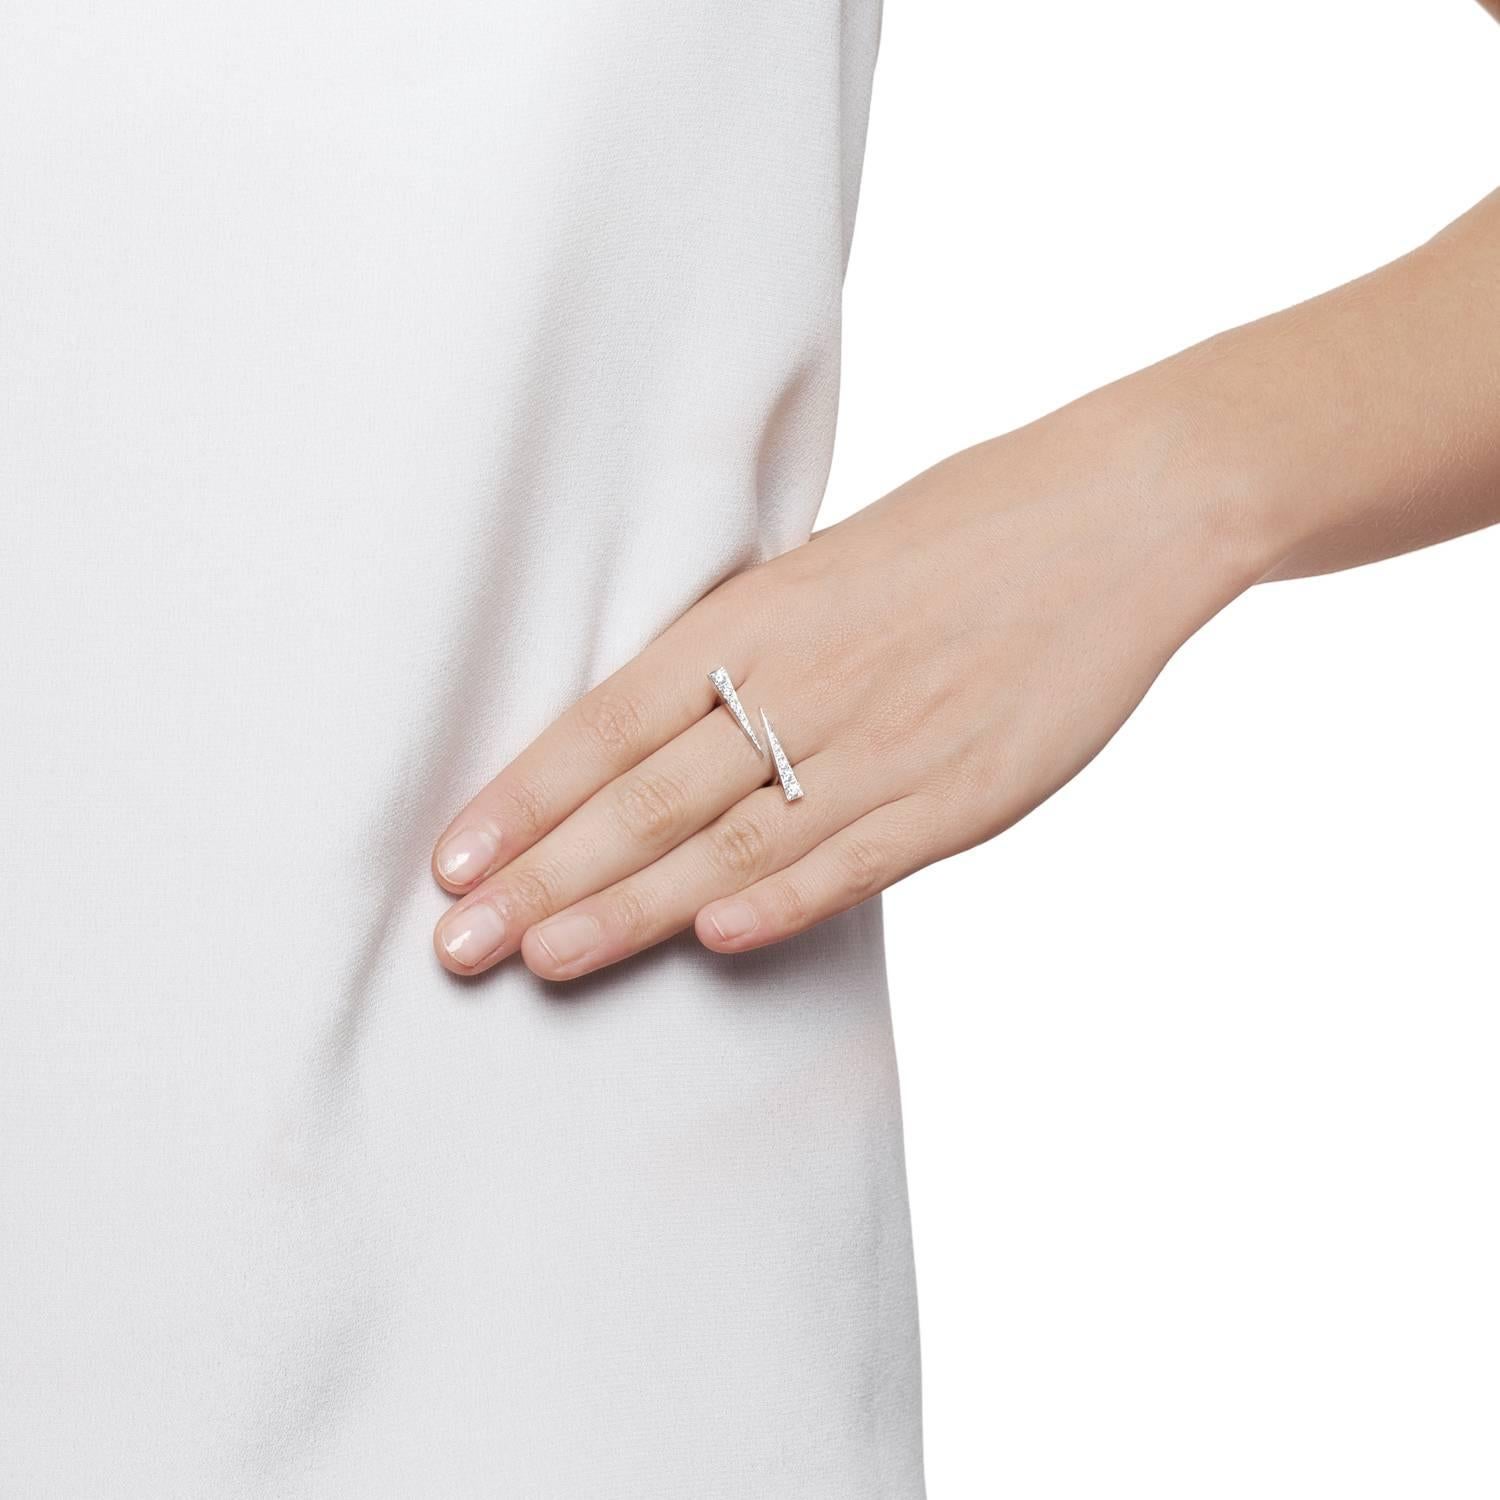 Twin Sparks Ring in 18 carat White Gold and Diamonds is a delicate modern, elegant and refined design. The signature Daou Sparks from the collection of delicate stacking rings and convertible earrings takes the perfectly proportioned 7 stone set